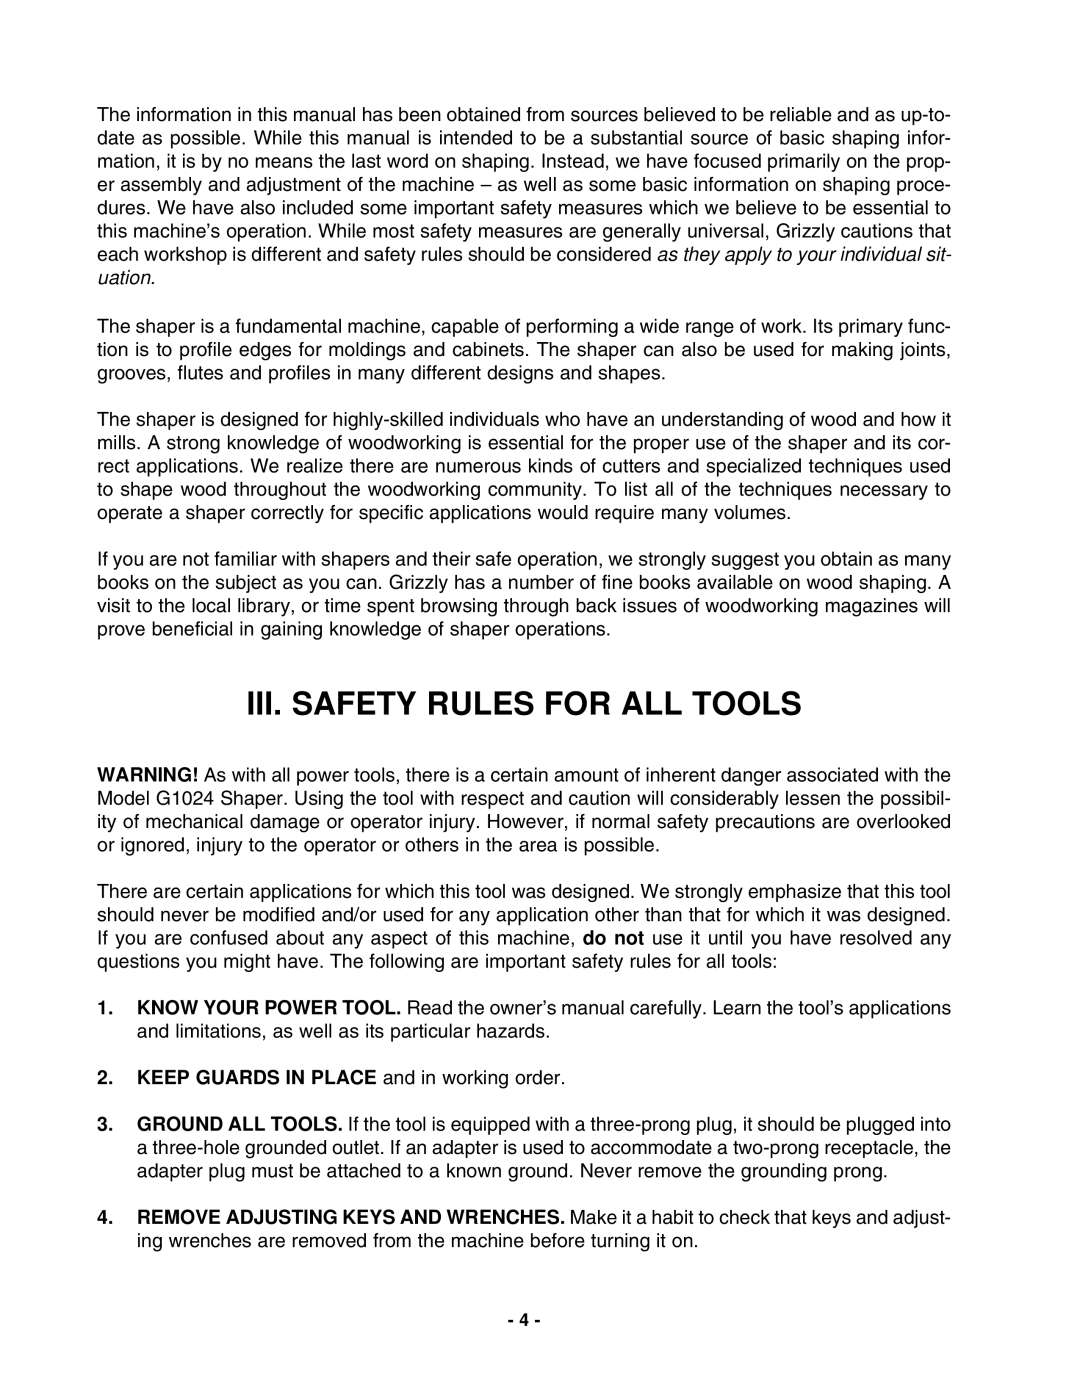 Grizzly G1024 instruction manual Iii. Safety Rules For All Tools, KEEP GUARDS IN PLACE and in working order 